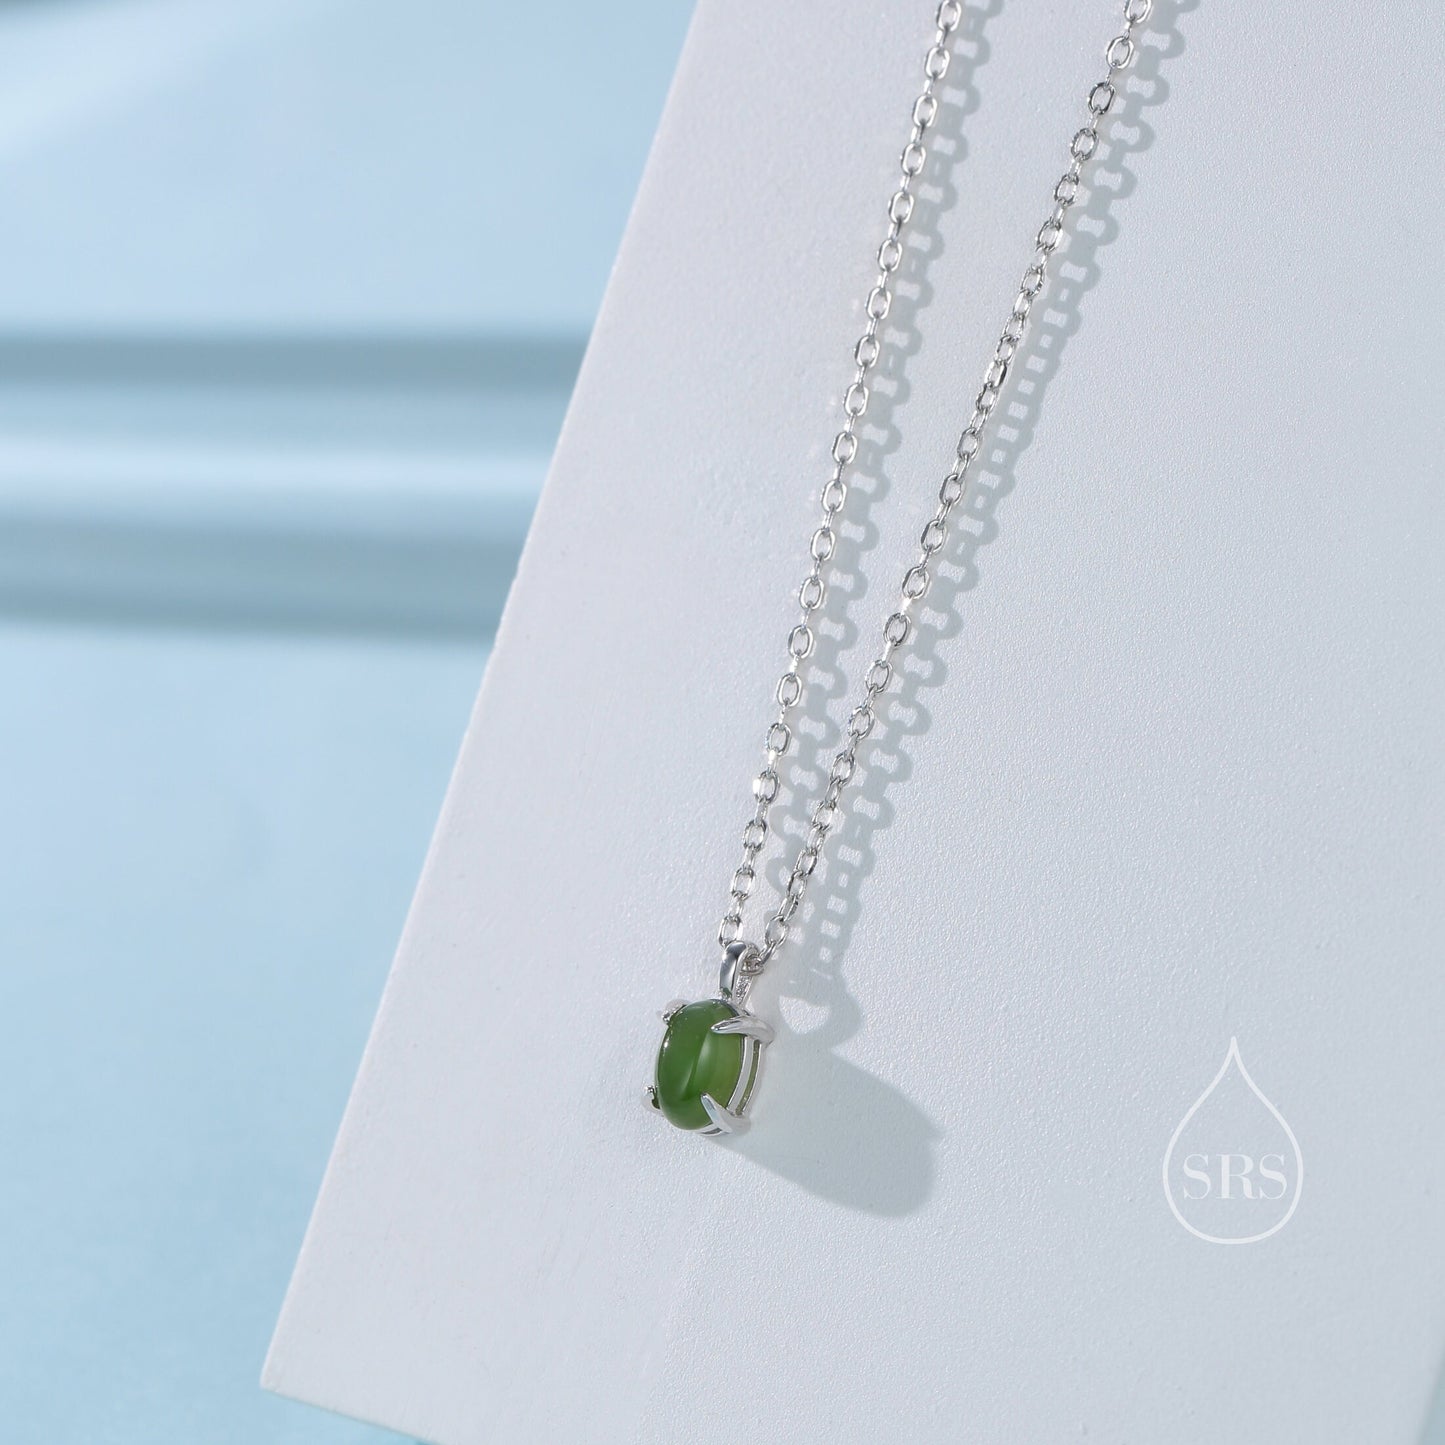 Genuine Green Jade Oval Necklace in Sterling Silver, 4x6mm Dainty Jade Oval Cabochon Necklace, Natural Jade Necklace